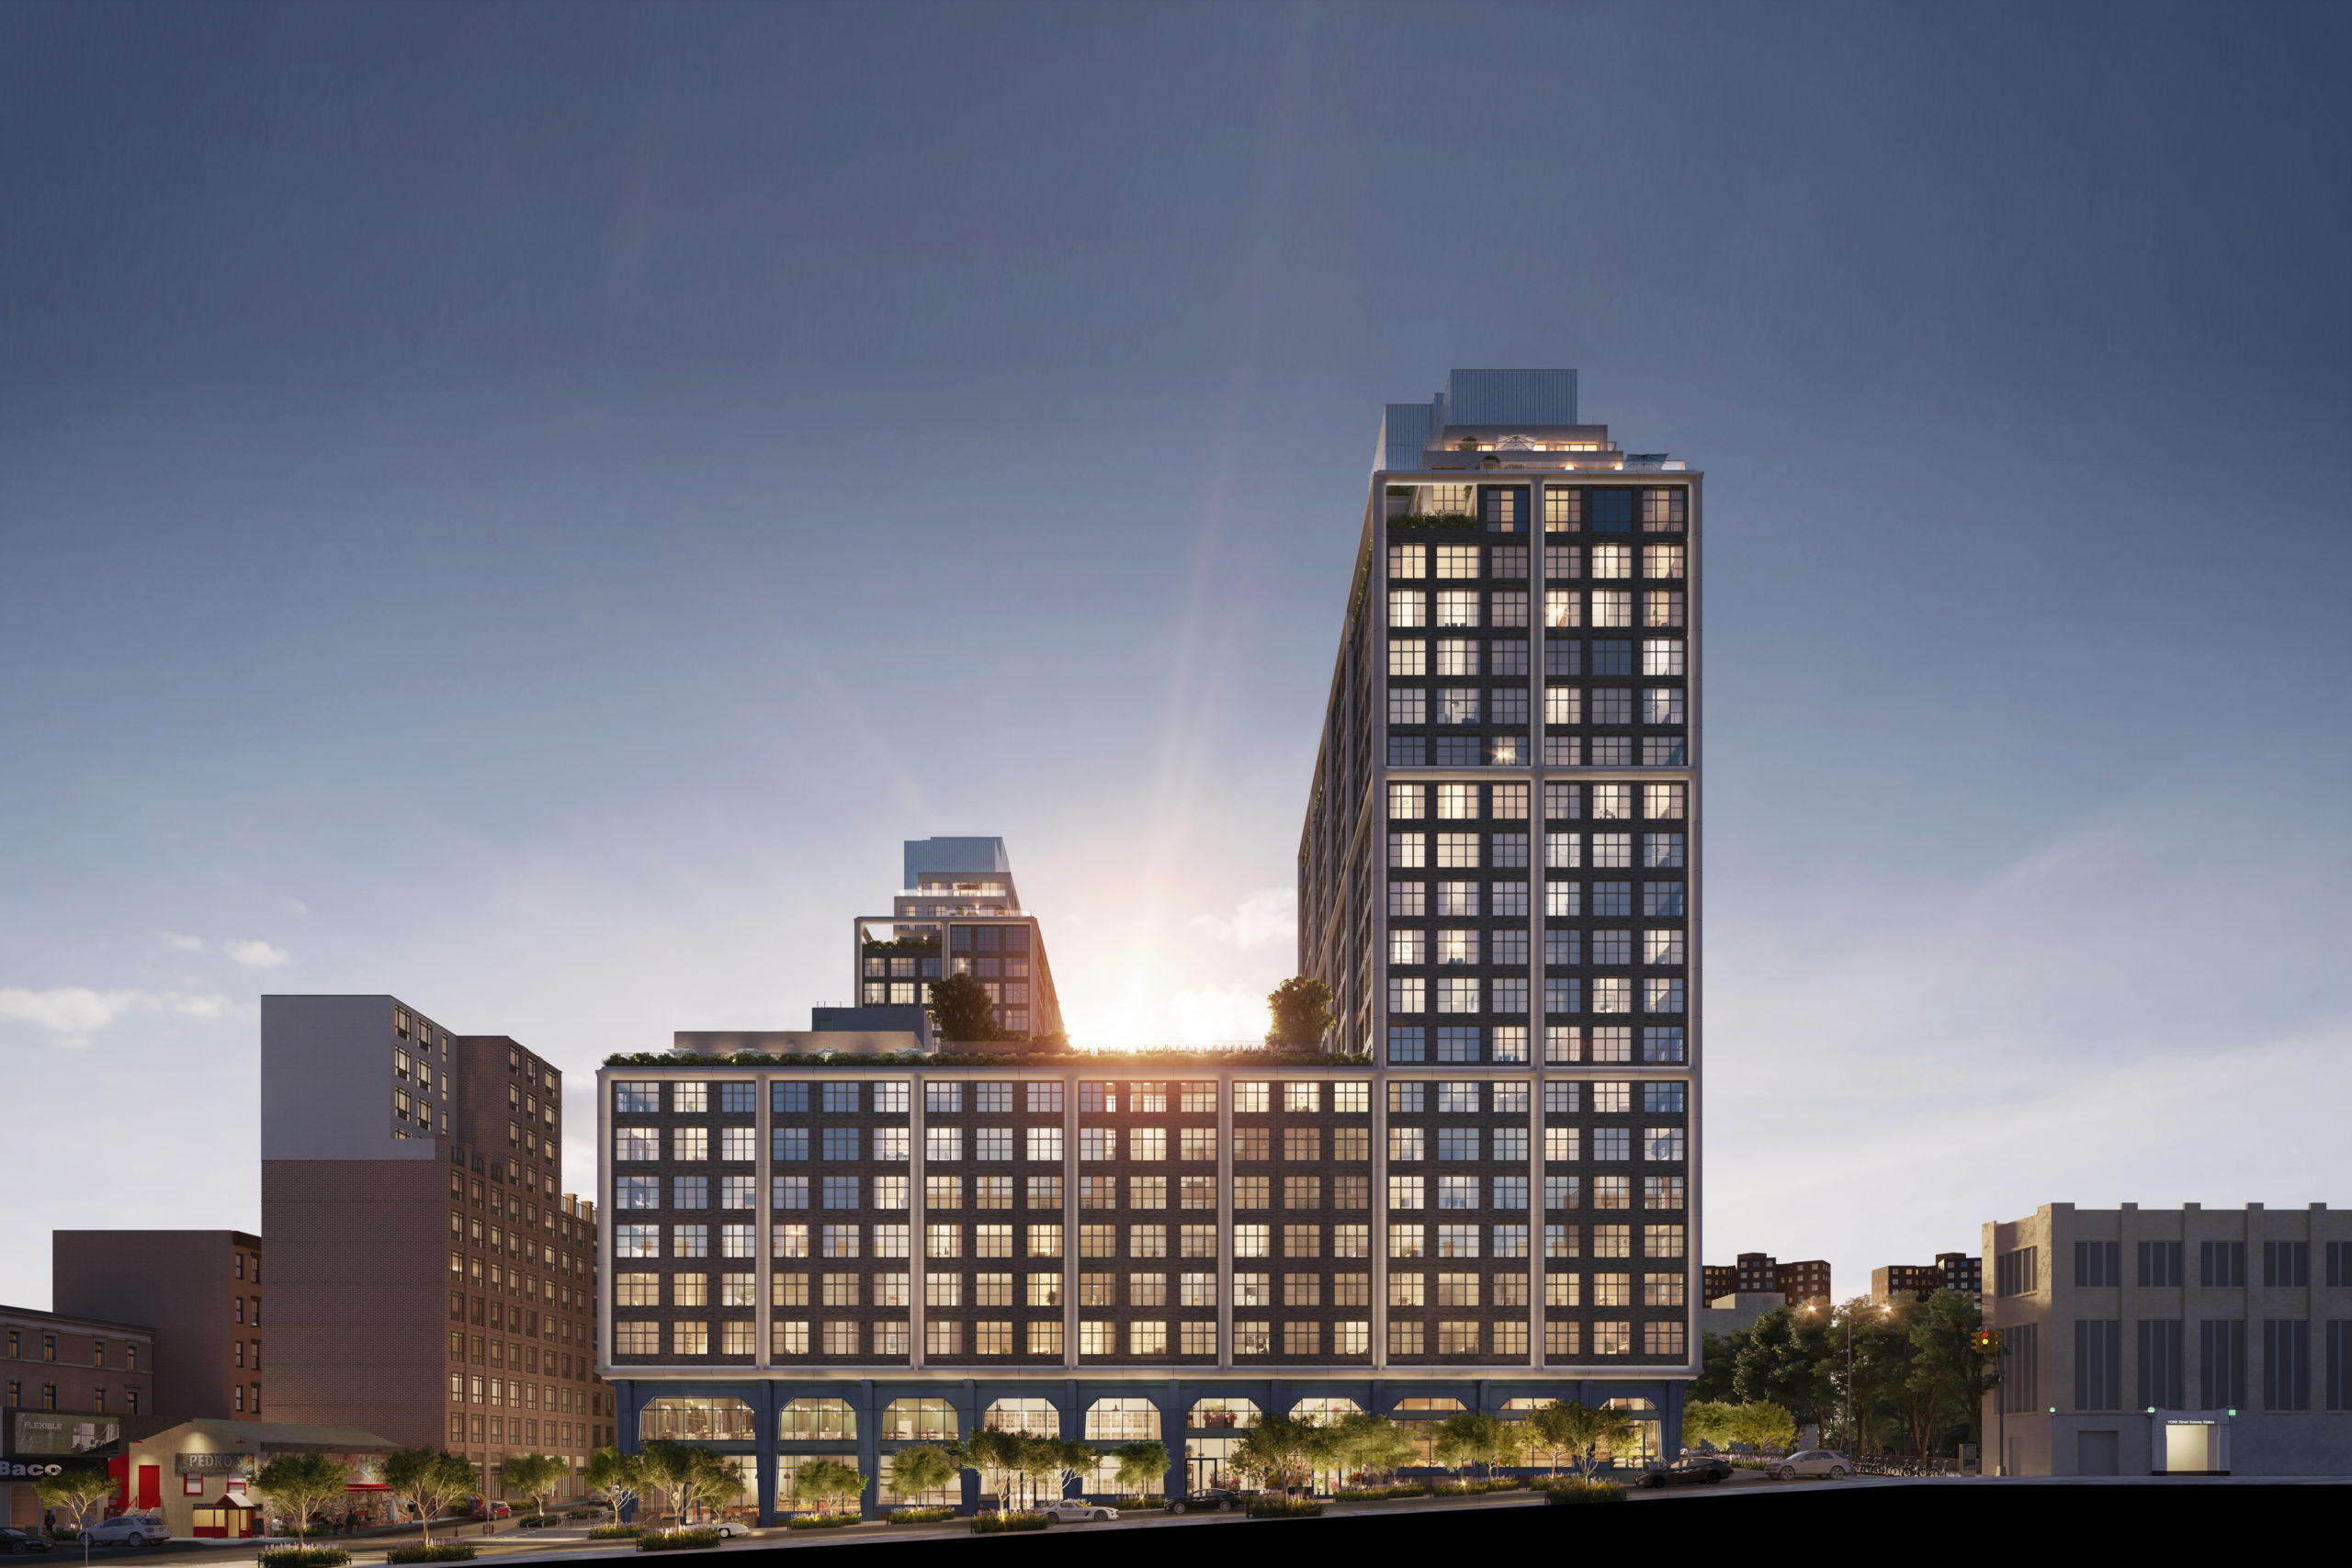 Here’s the developers’ vision for Front & York, which is under construction at 85 Jay St. Rendering by Williams New York